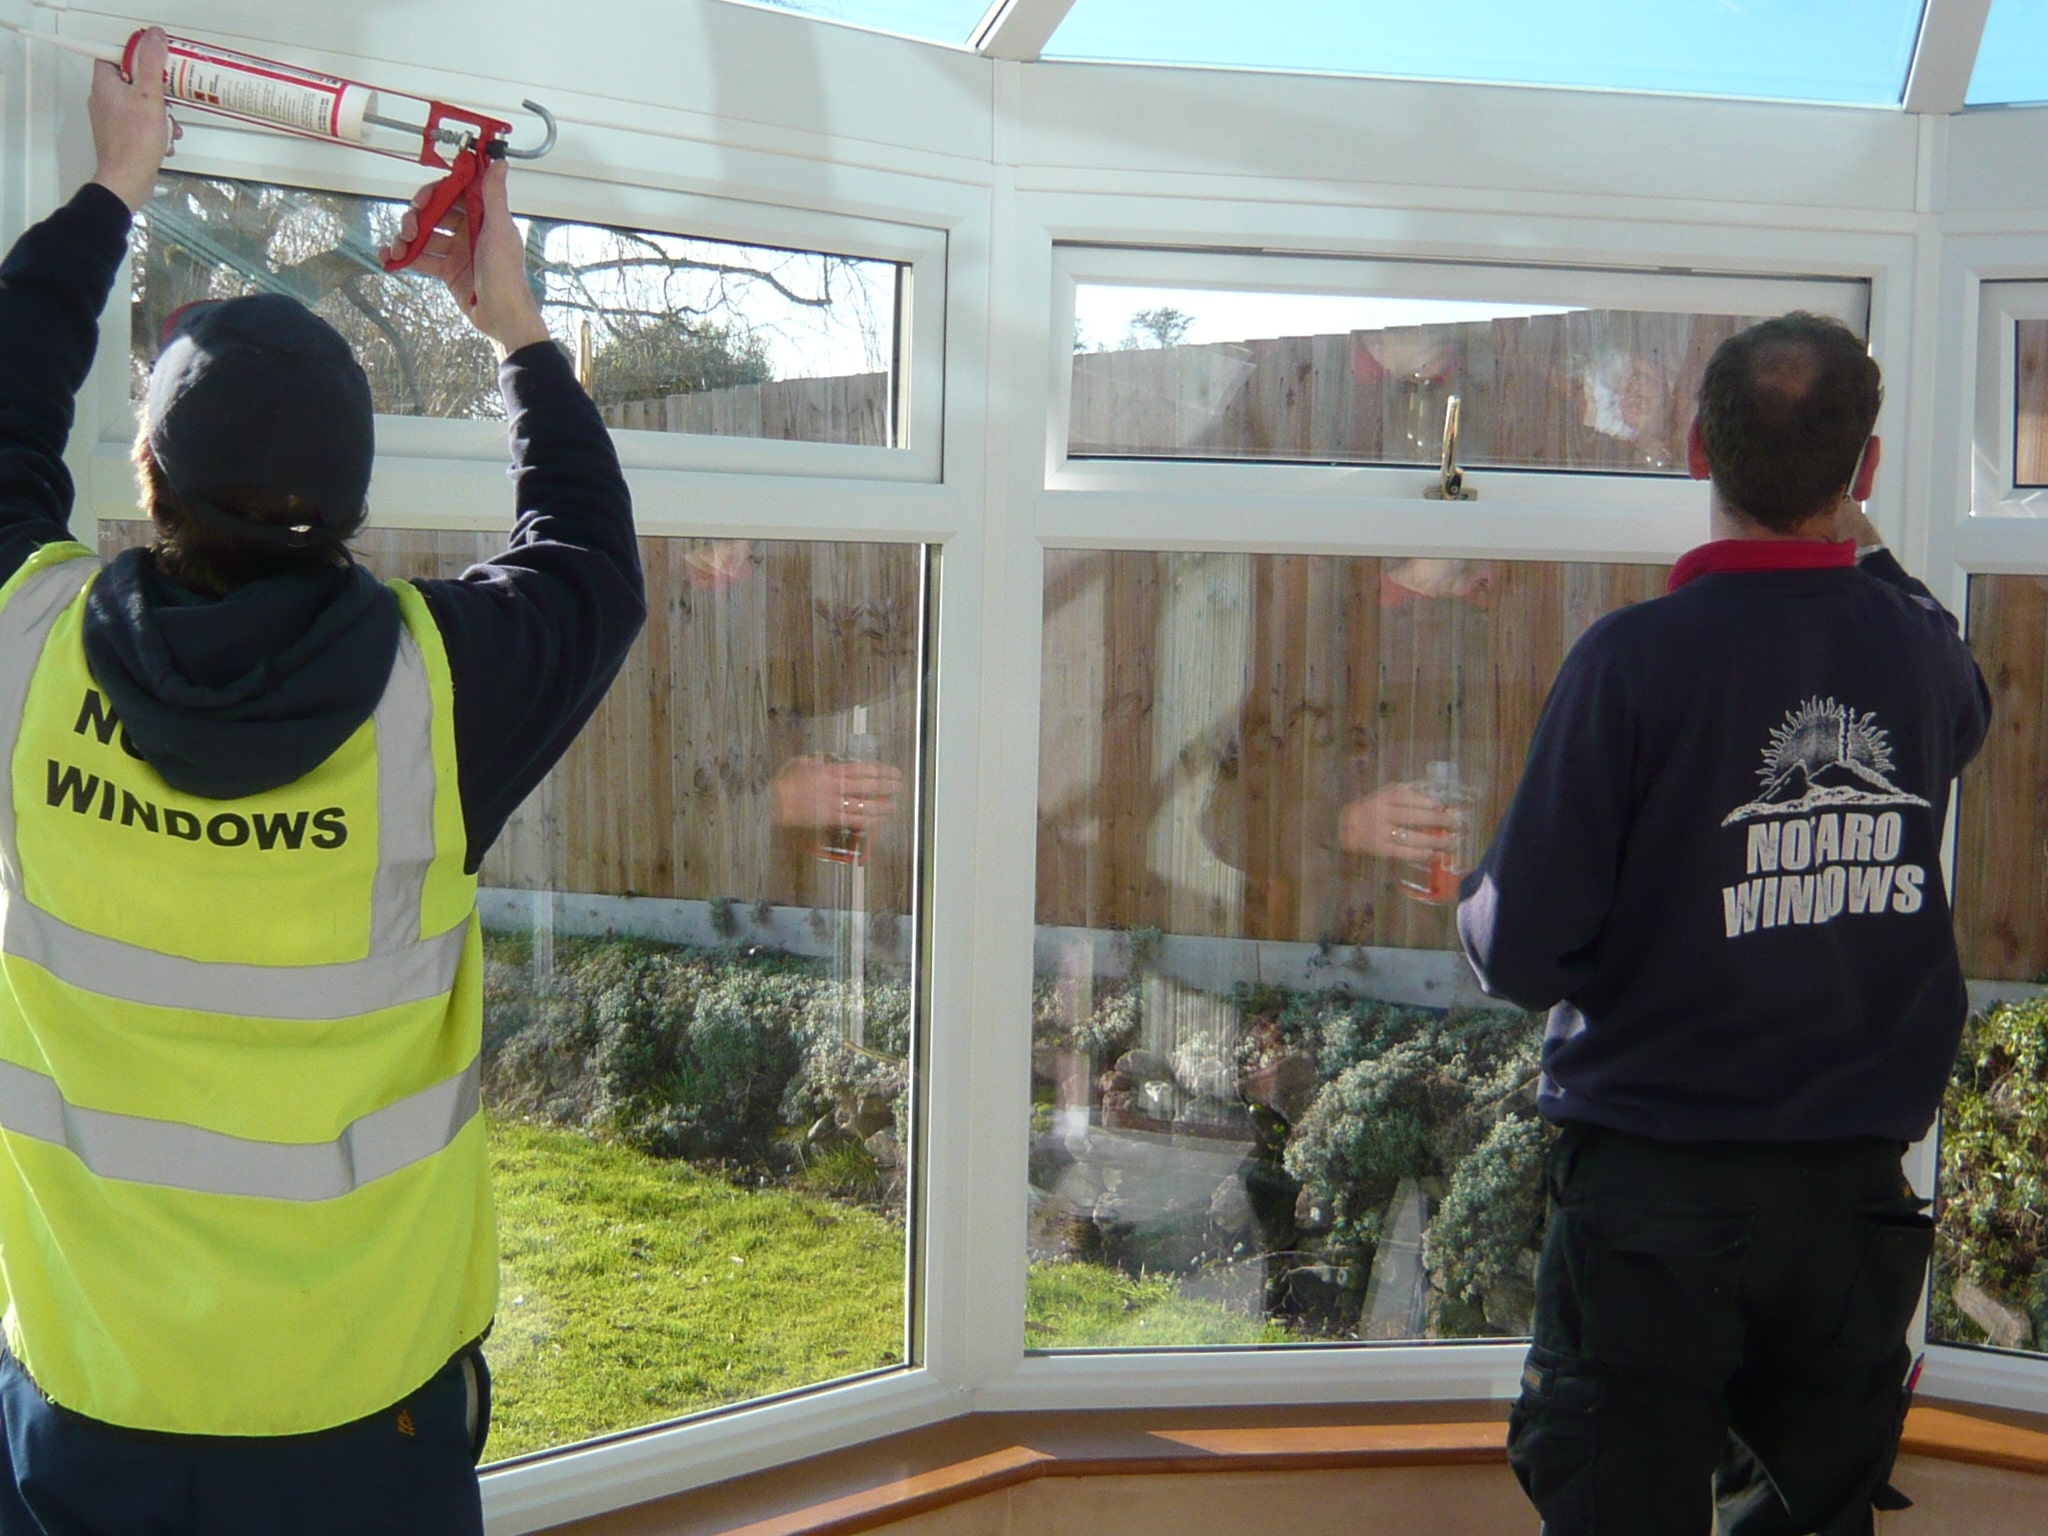 Notaro workers building a Victorian-style conservatory in Somerset